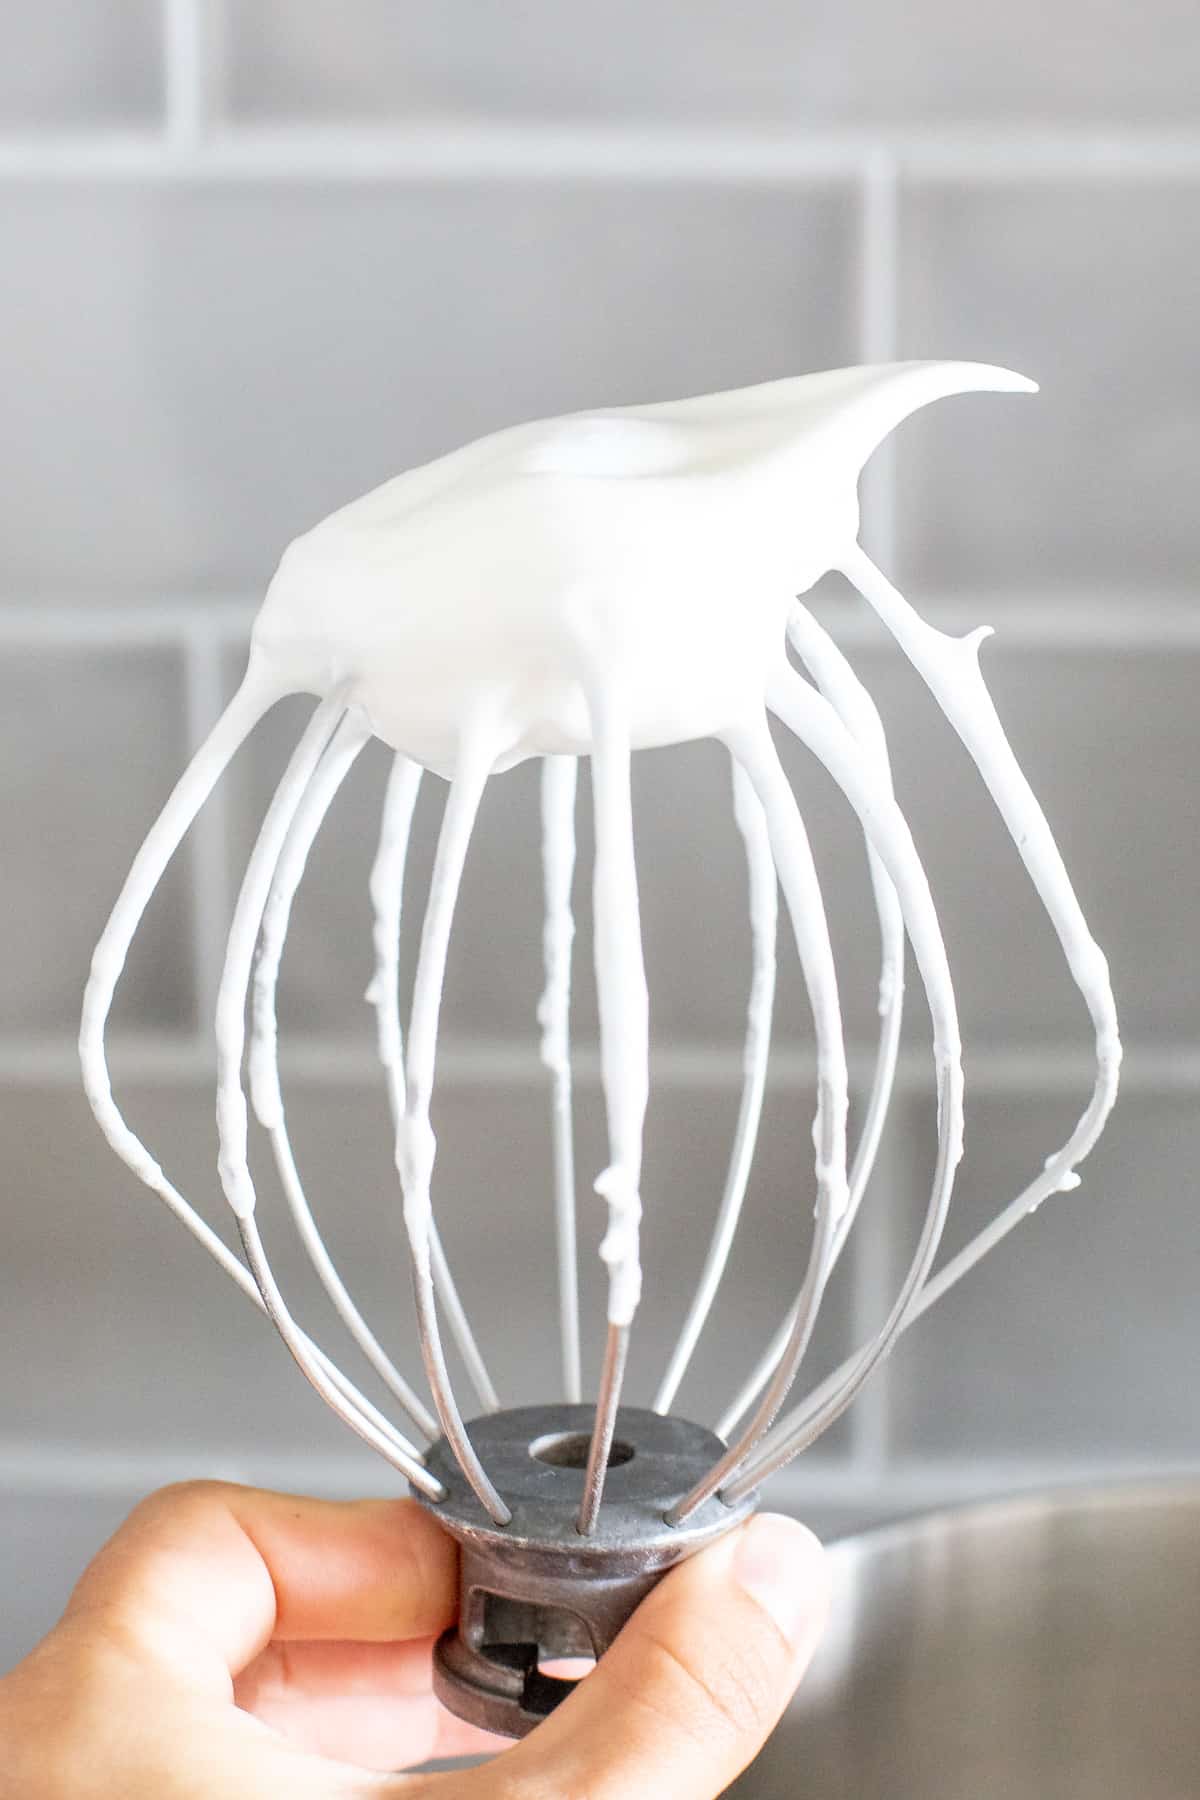 Whisk attachment of electric mixer with whipped egg whites